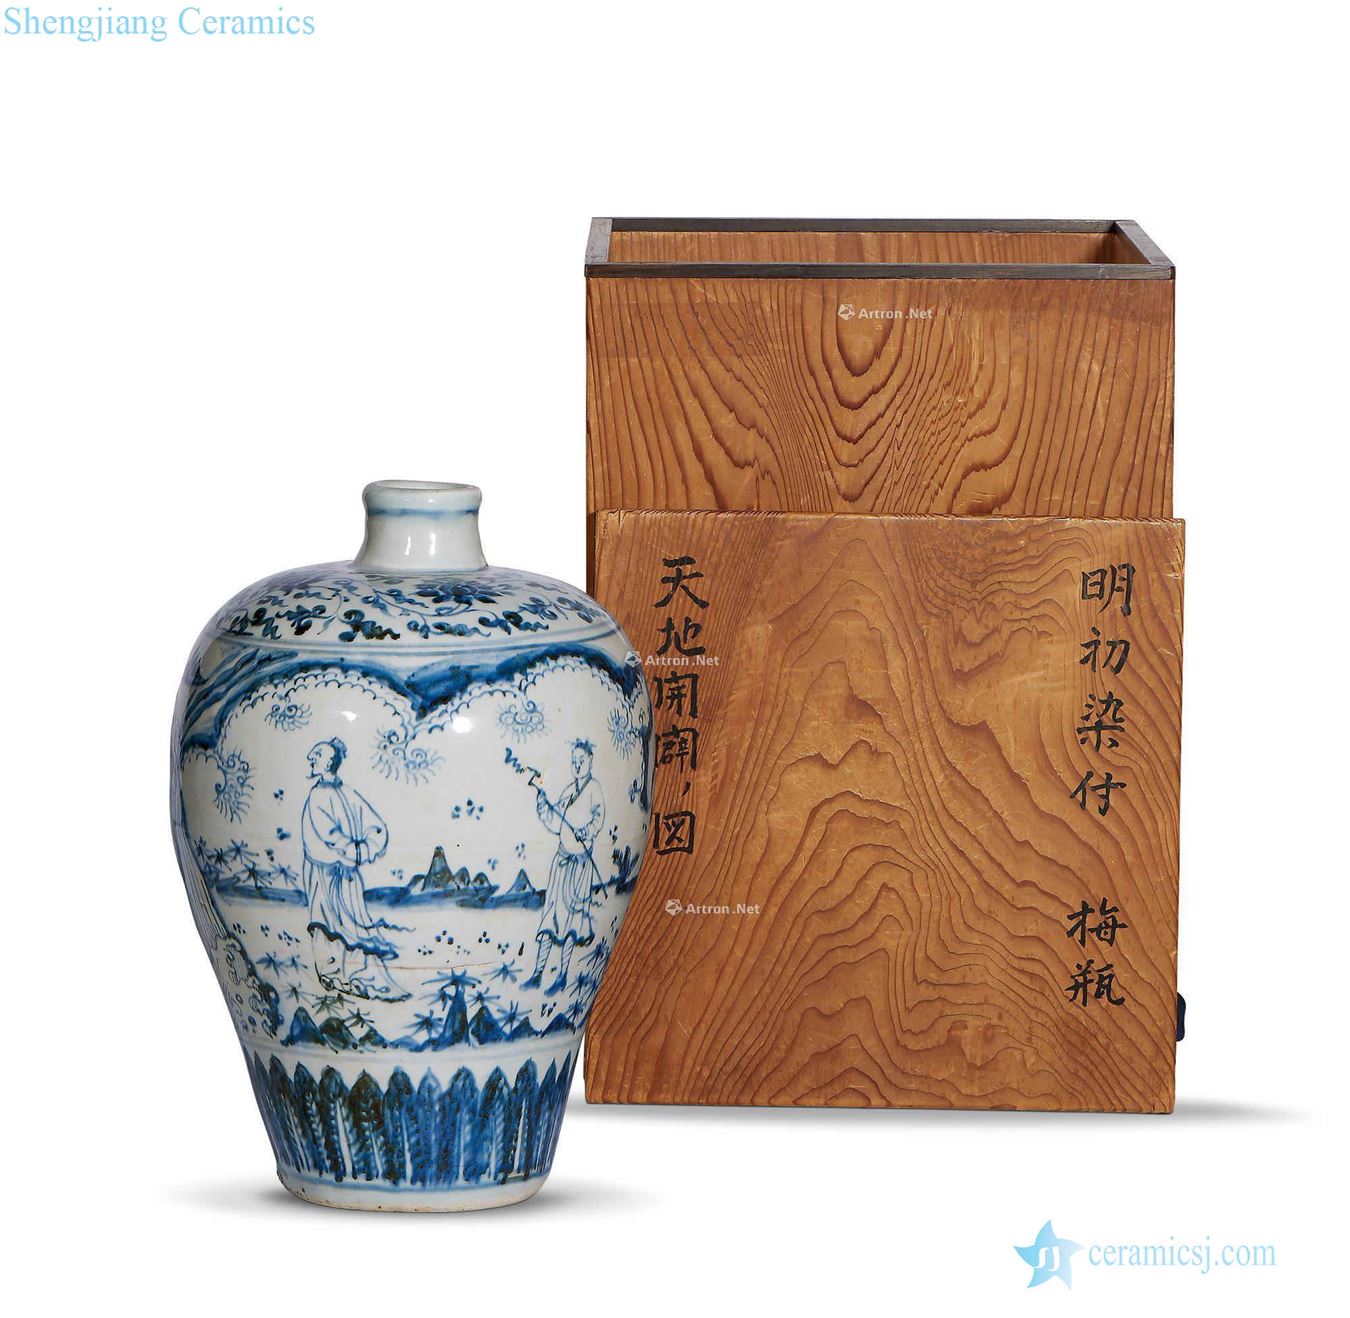 Blue and white coats character figure plum bottle in early Ming dynasty